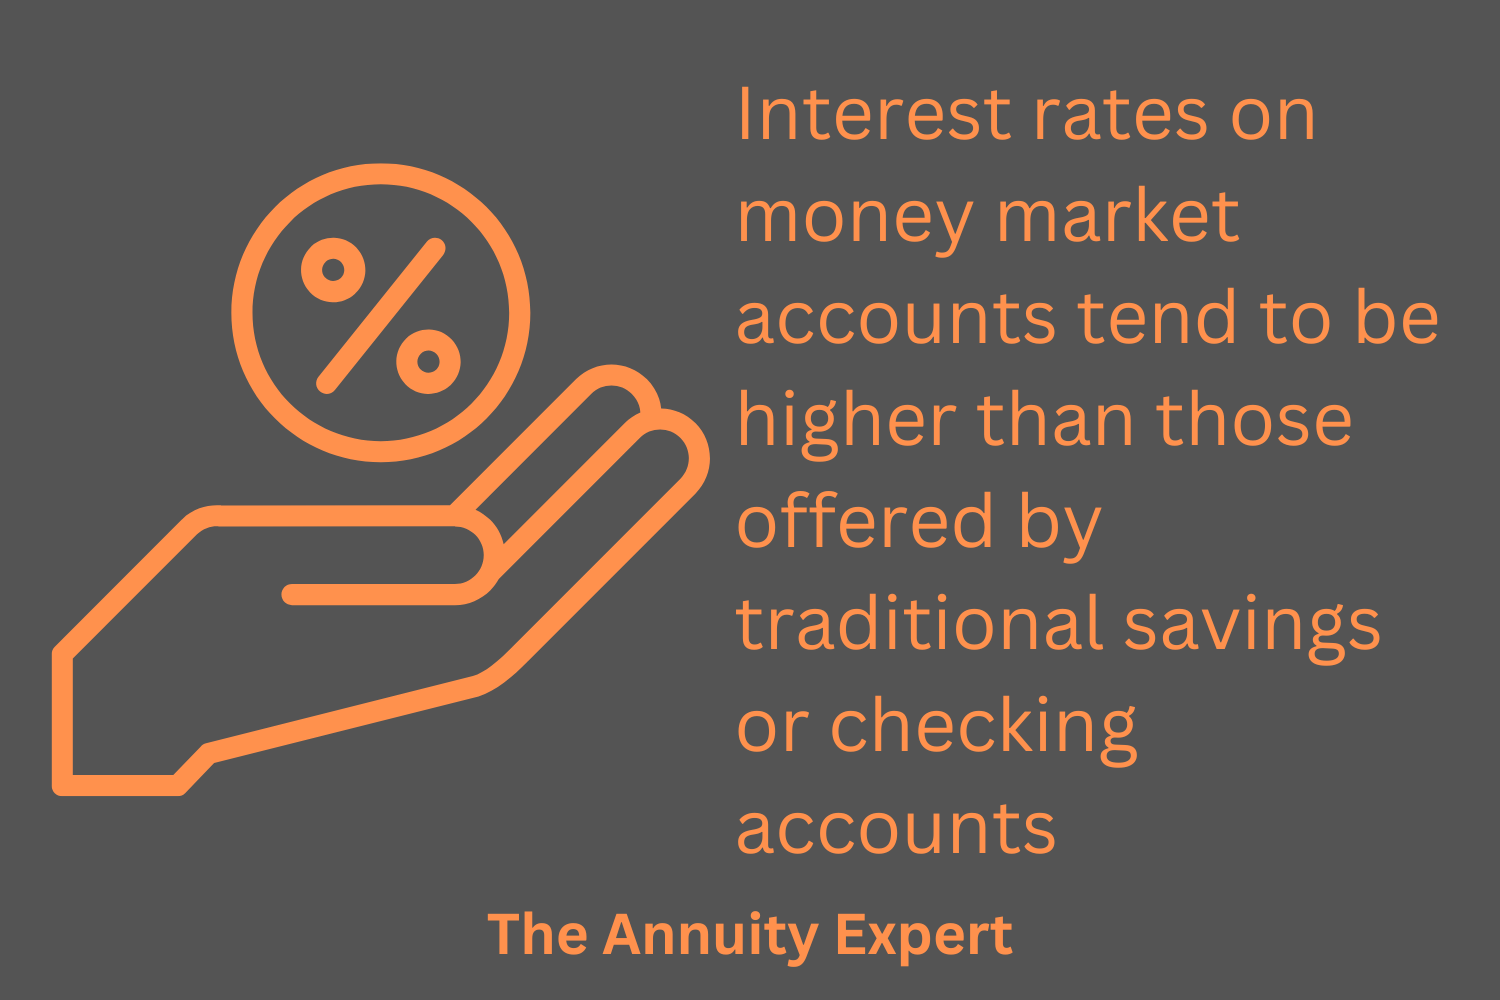 What Are The Advantages Of A Money Market Account?